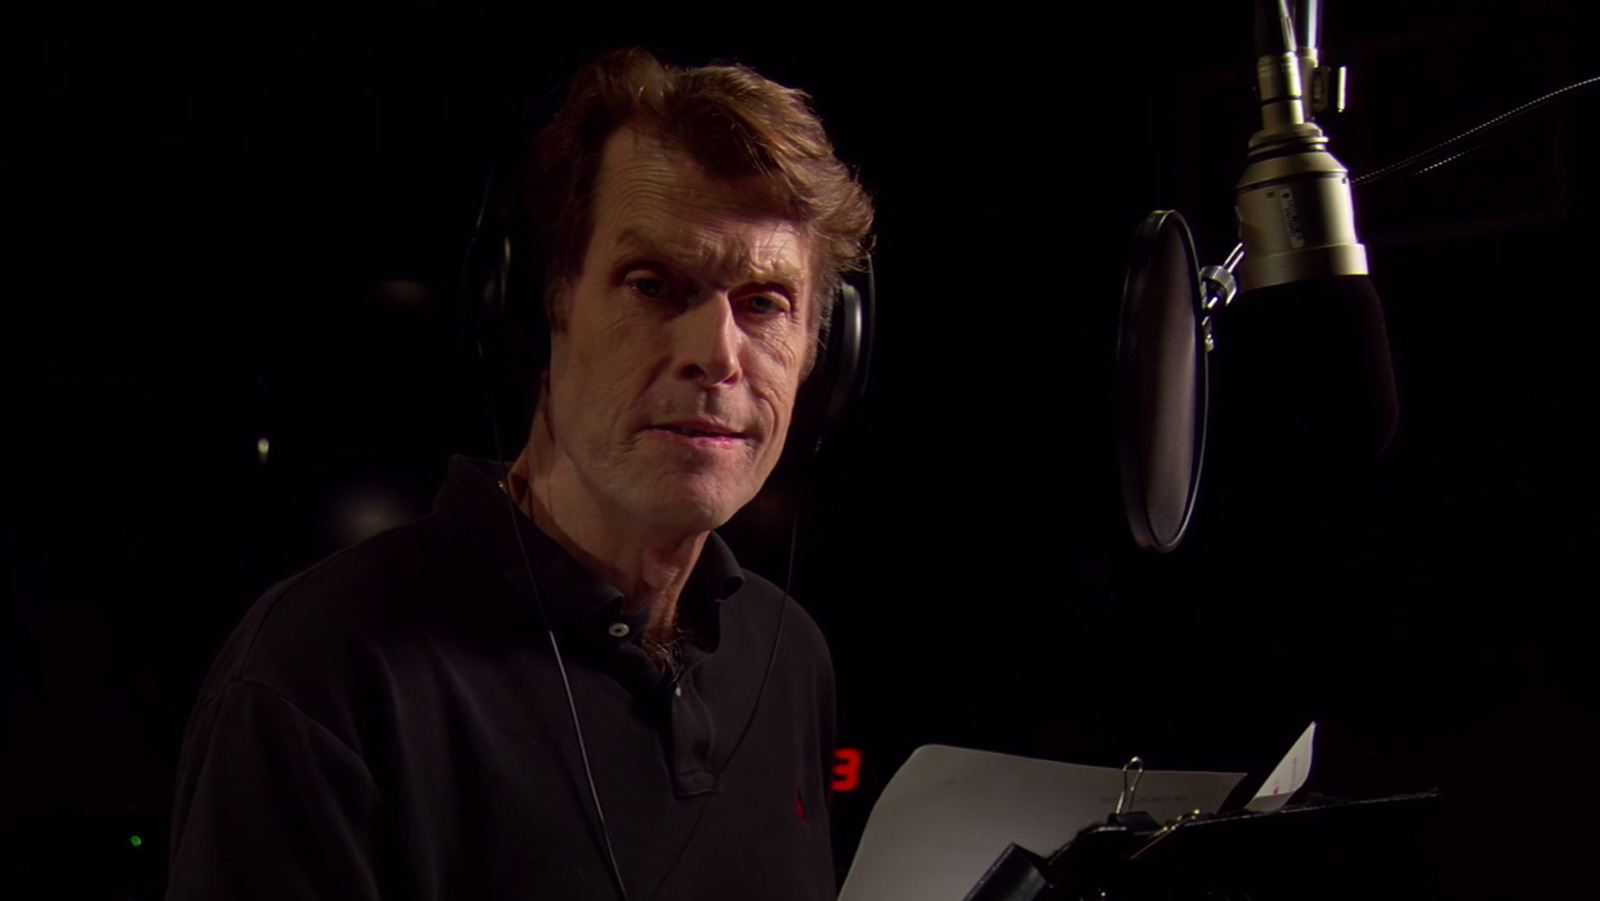 Batman Legend Kevin Conroy Writing Personal Story for DC Pride 2022